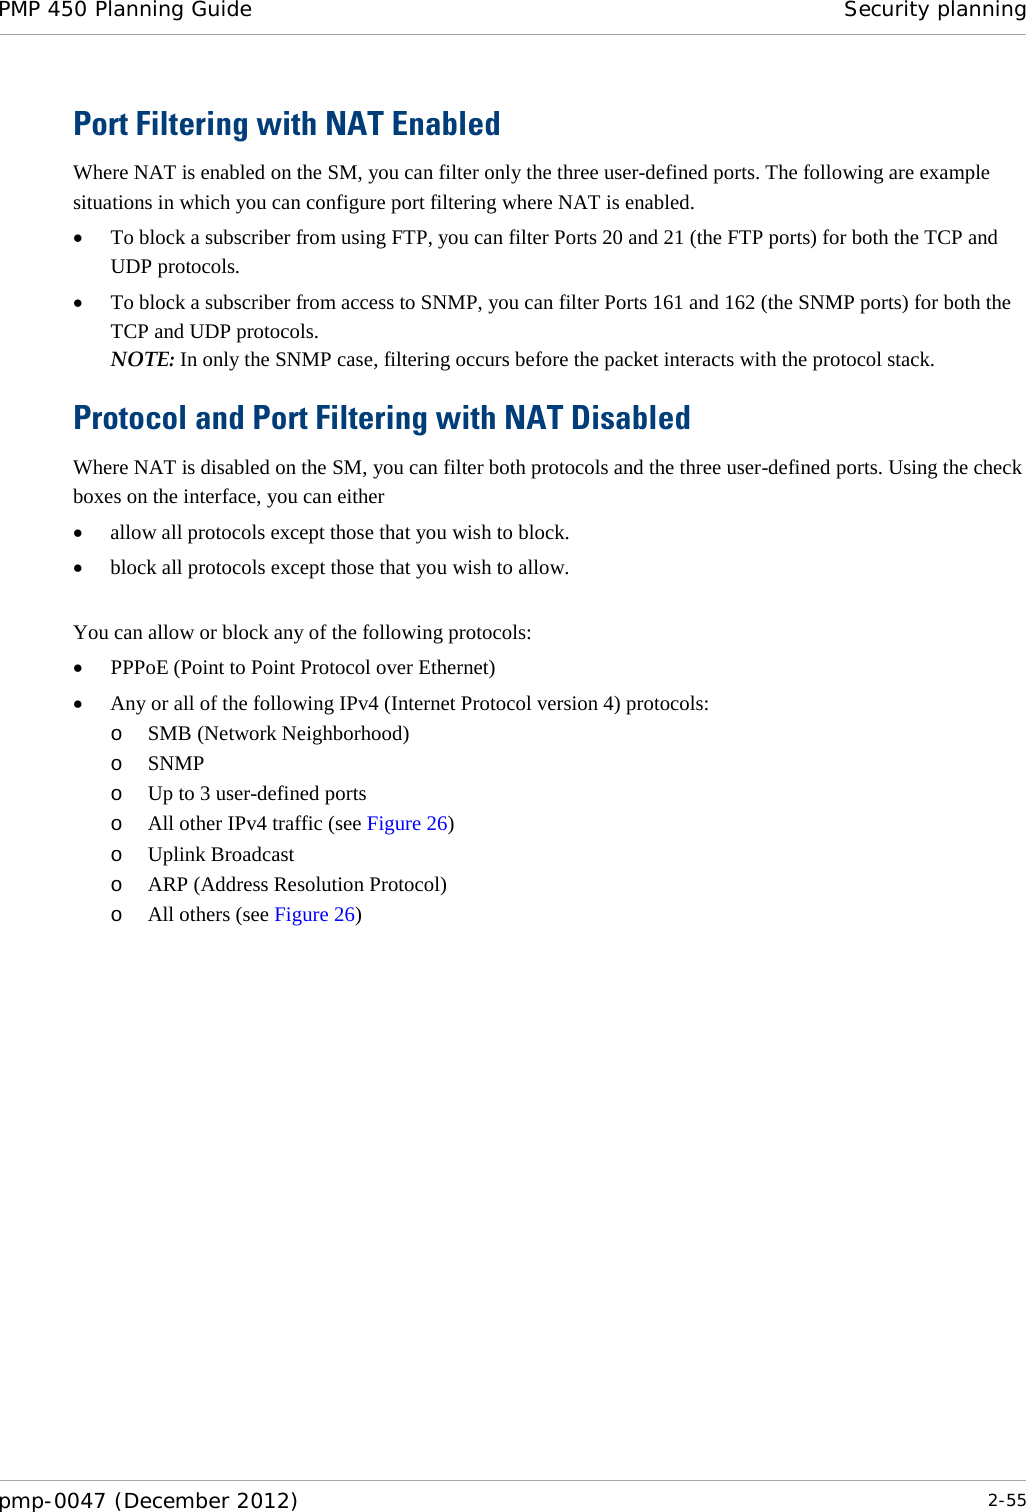 PMP 450 Planning Guide Security planning  pmp-0047 (December 2012)  2-55  Port Filtering with NAT Enabled Where NAT is enabled on the SM, you can filter only the three user-defined ports. The following are example situations in which you can configure port filtering where NAT is enabled. • To block a subscriber from using FTP, you can filter Ports 20 and 21 (the FTP ports) for both the TCP and UDP protocols.  • To block a subscriber from access to SNMP, you can filter Ports 161 and 162 (the SNMP ports) for both the TCP and UDP protocols.  NOTE: In only the SNMP case, filtering occurs before the packet interacts with the protocol stack. Protocol and Port Filtering with NAT Disabled Where NAT is disabled on the SM, you can filter both protocols and the three user-defined ports. Using the check boxes on the interface, you can either  • allow all protocols except those that you wish to block. • block all protocols except those that you wish to allow.  You can allow or block any of the following protocols: • PPPoE (Point to Point Protocol over Ethernet) • Any or all of the following IPv4 (Internet Protocol version 4) protocols: o SMB (Network Neighborhood) o SNMP o Up to 3 user-defined ports o All other IPv4 traffic (see Figure 26) o Uplink Broadcast o ARP (Address Resolution Protocol) o All others (see Figure 26)  